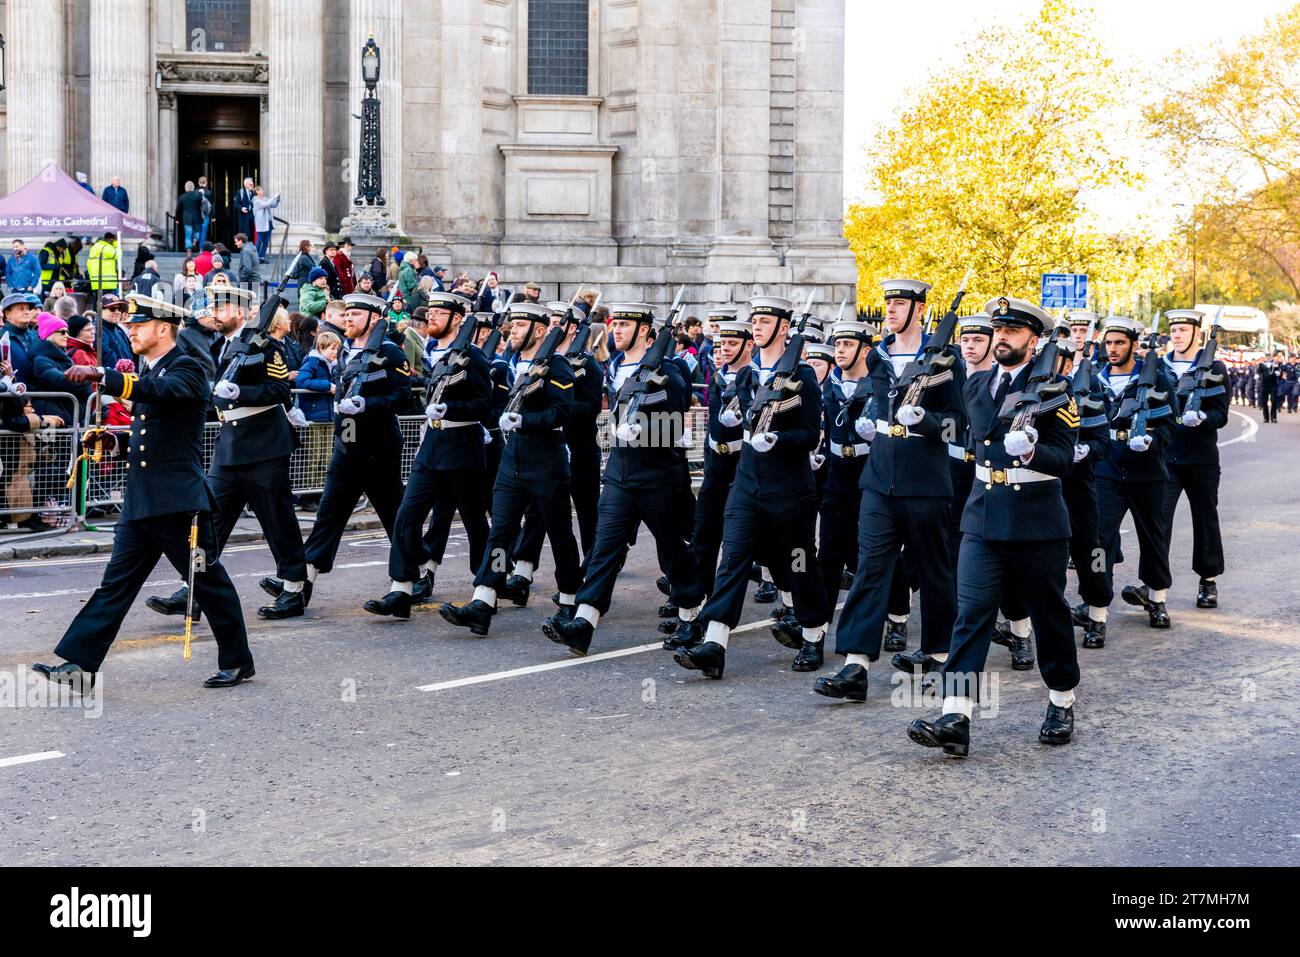 Die Royal Navy Armed Contingent nimmt an der Lord Mayor's Show in London Teil Stockfoto